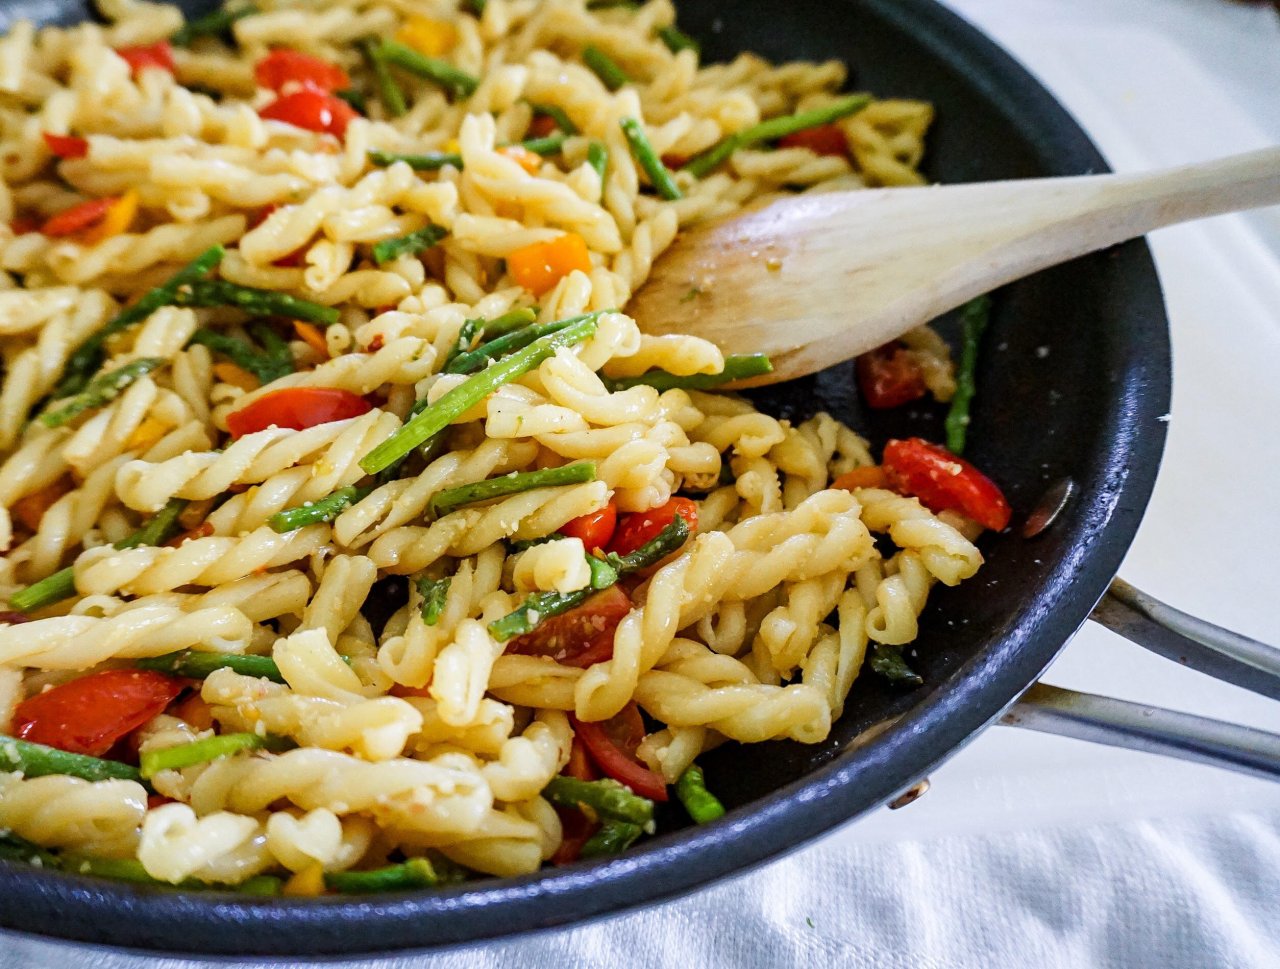 🍝 Can We Accurately Guess Your Age Based on Your Pasta Opinions? 10